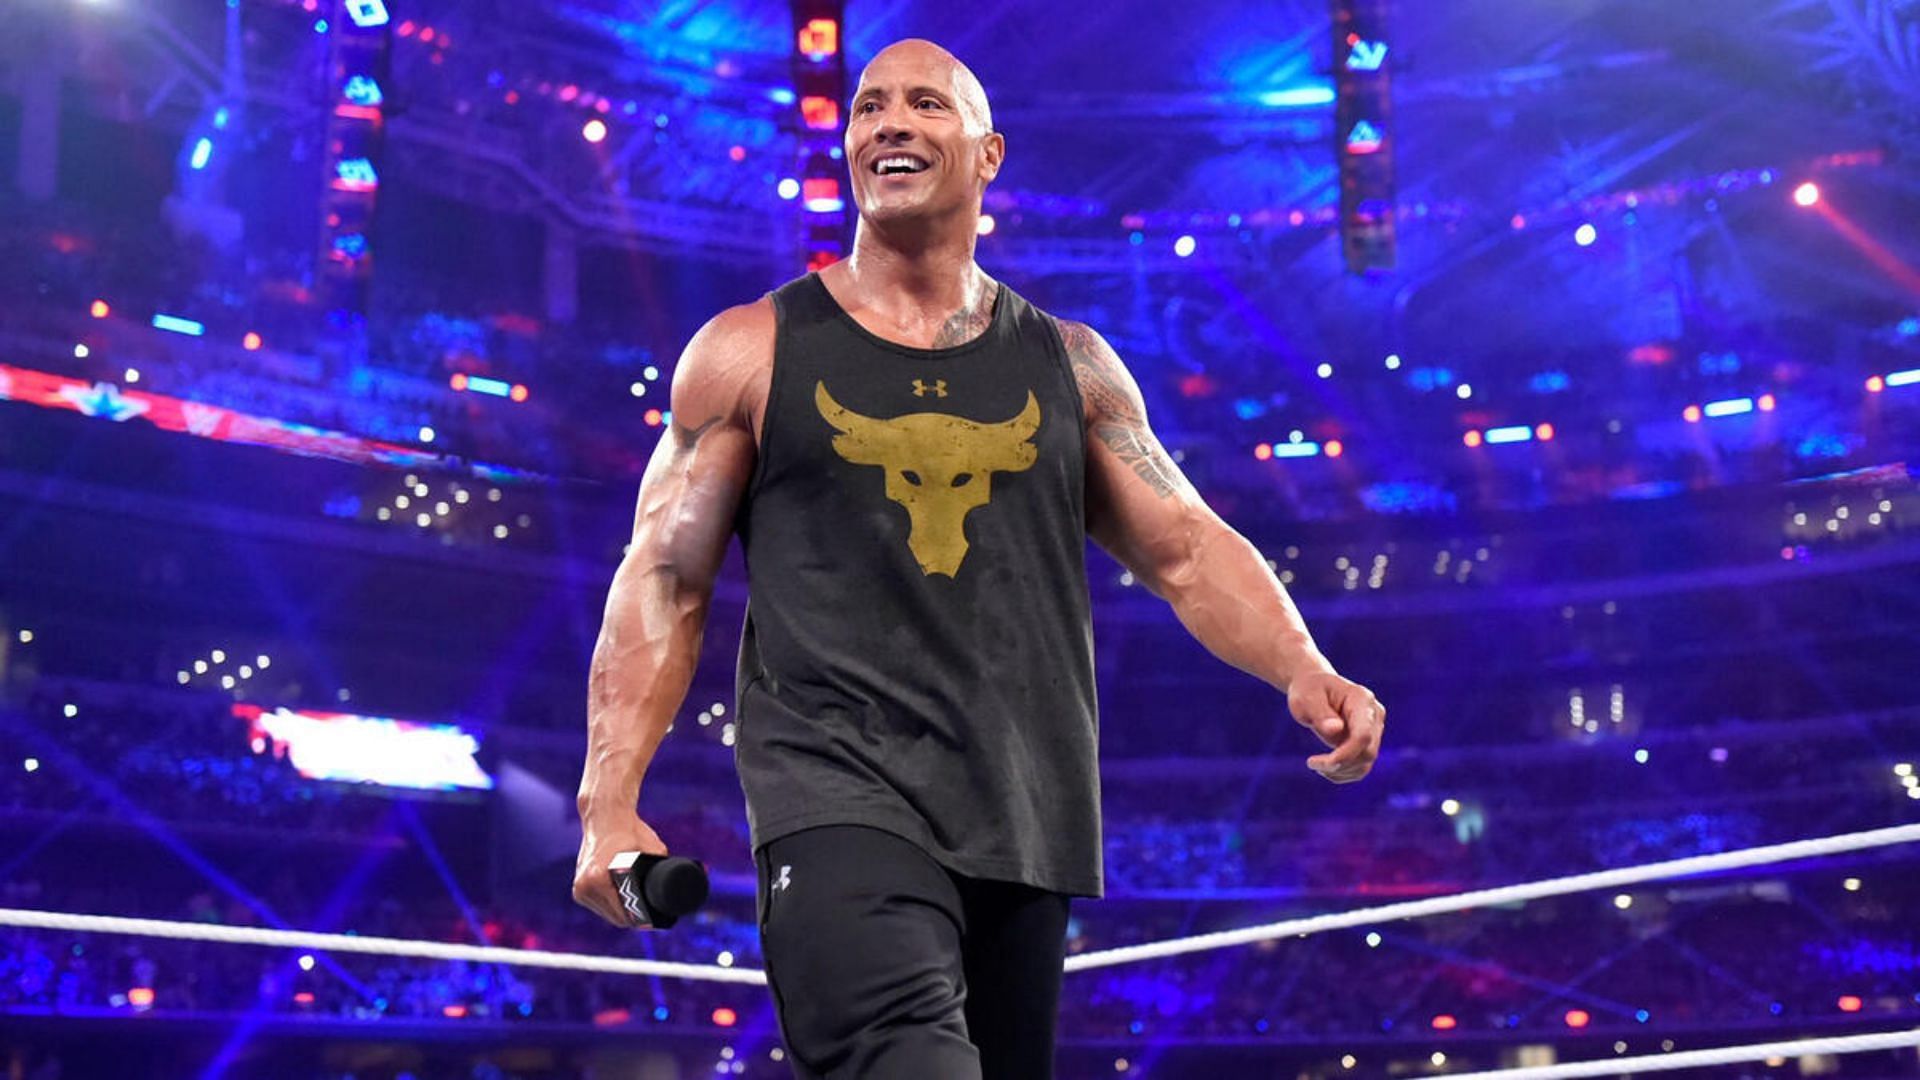 What is next for The Rock in WWE?